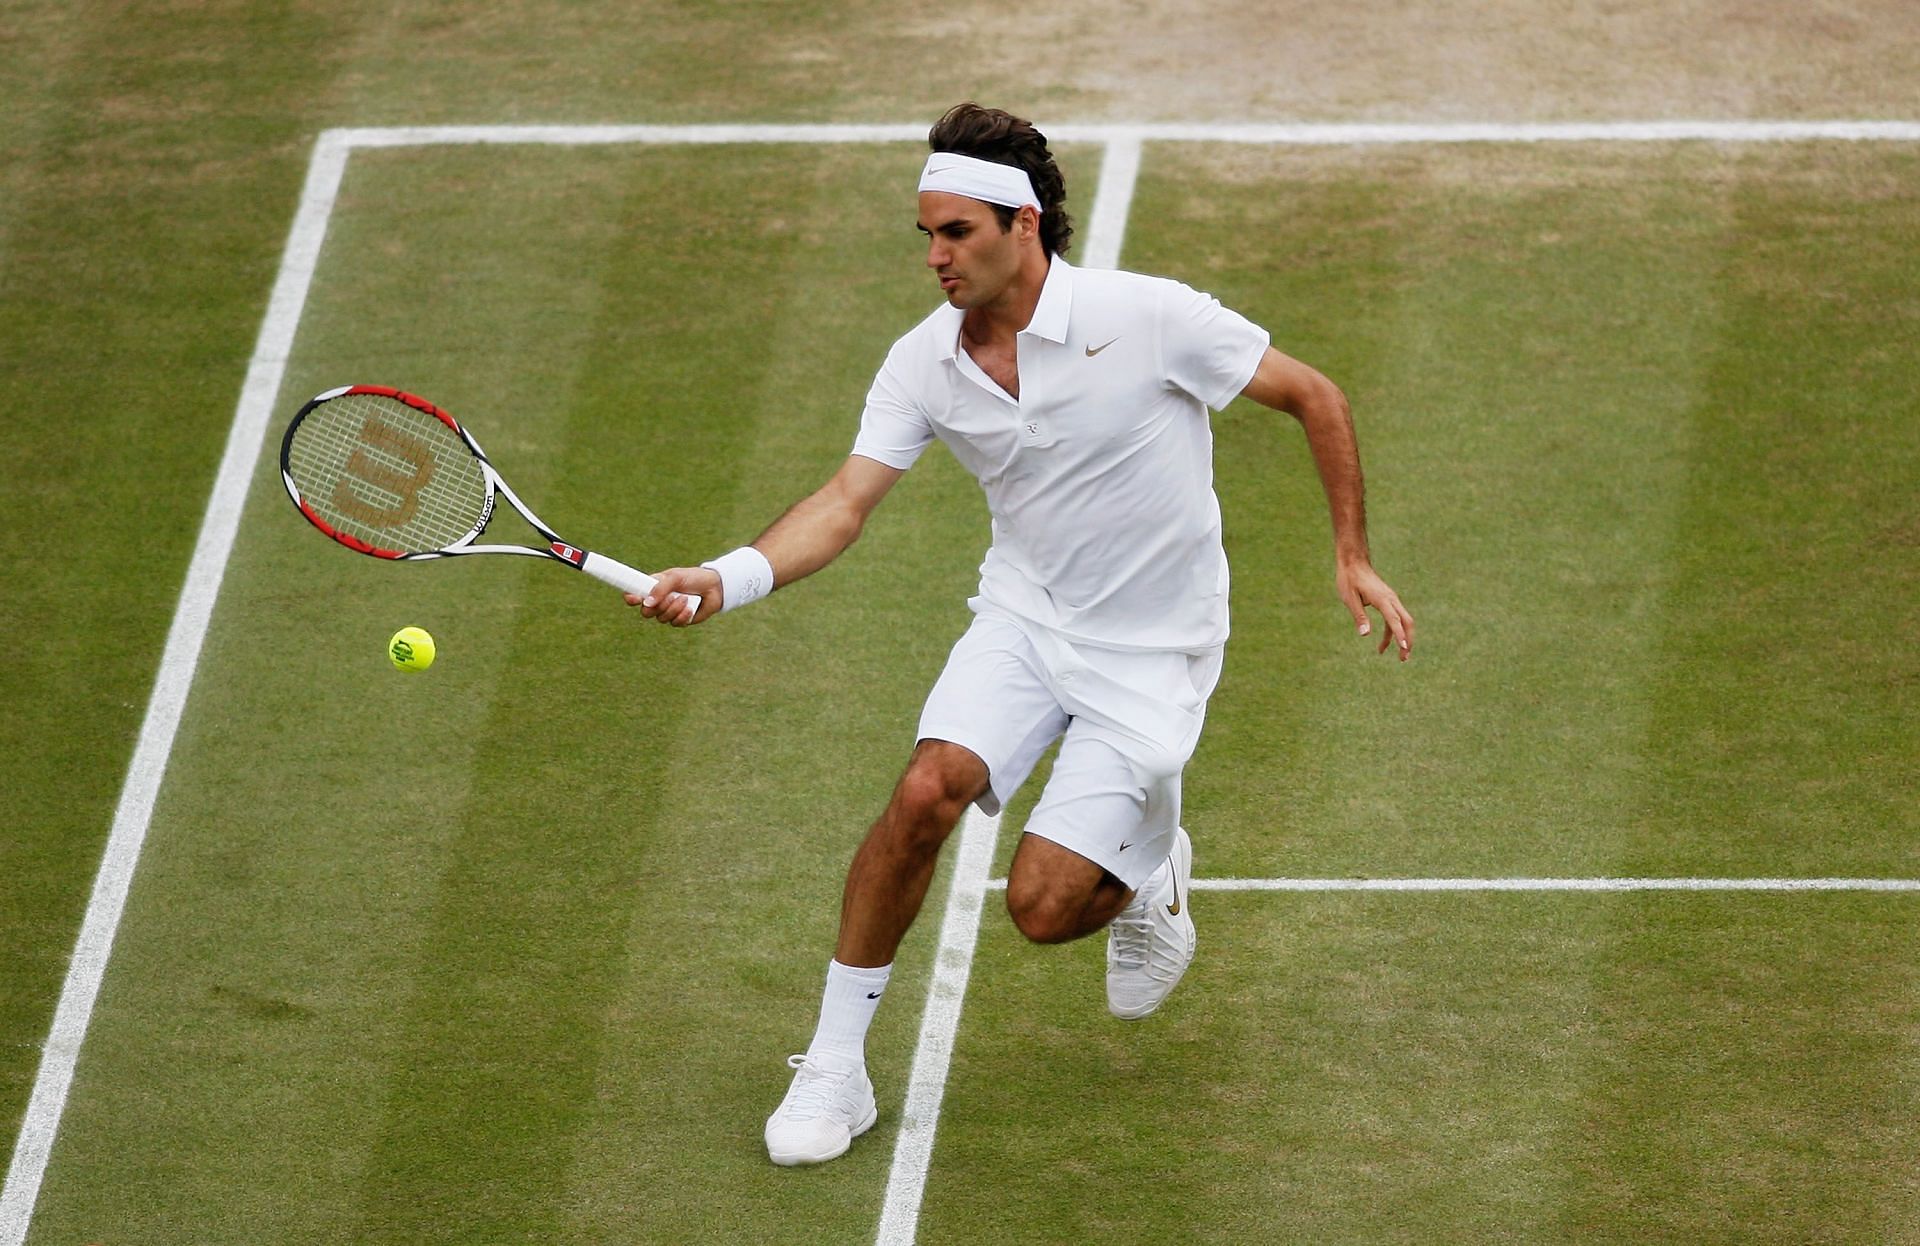 Jose Higueras is the reason Roger Federer added the forehand drop shot to his arsenal